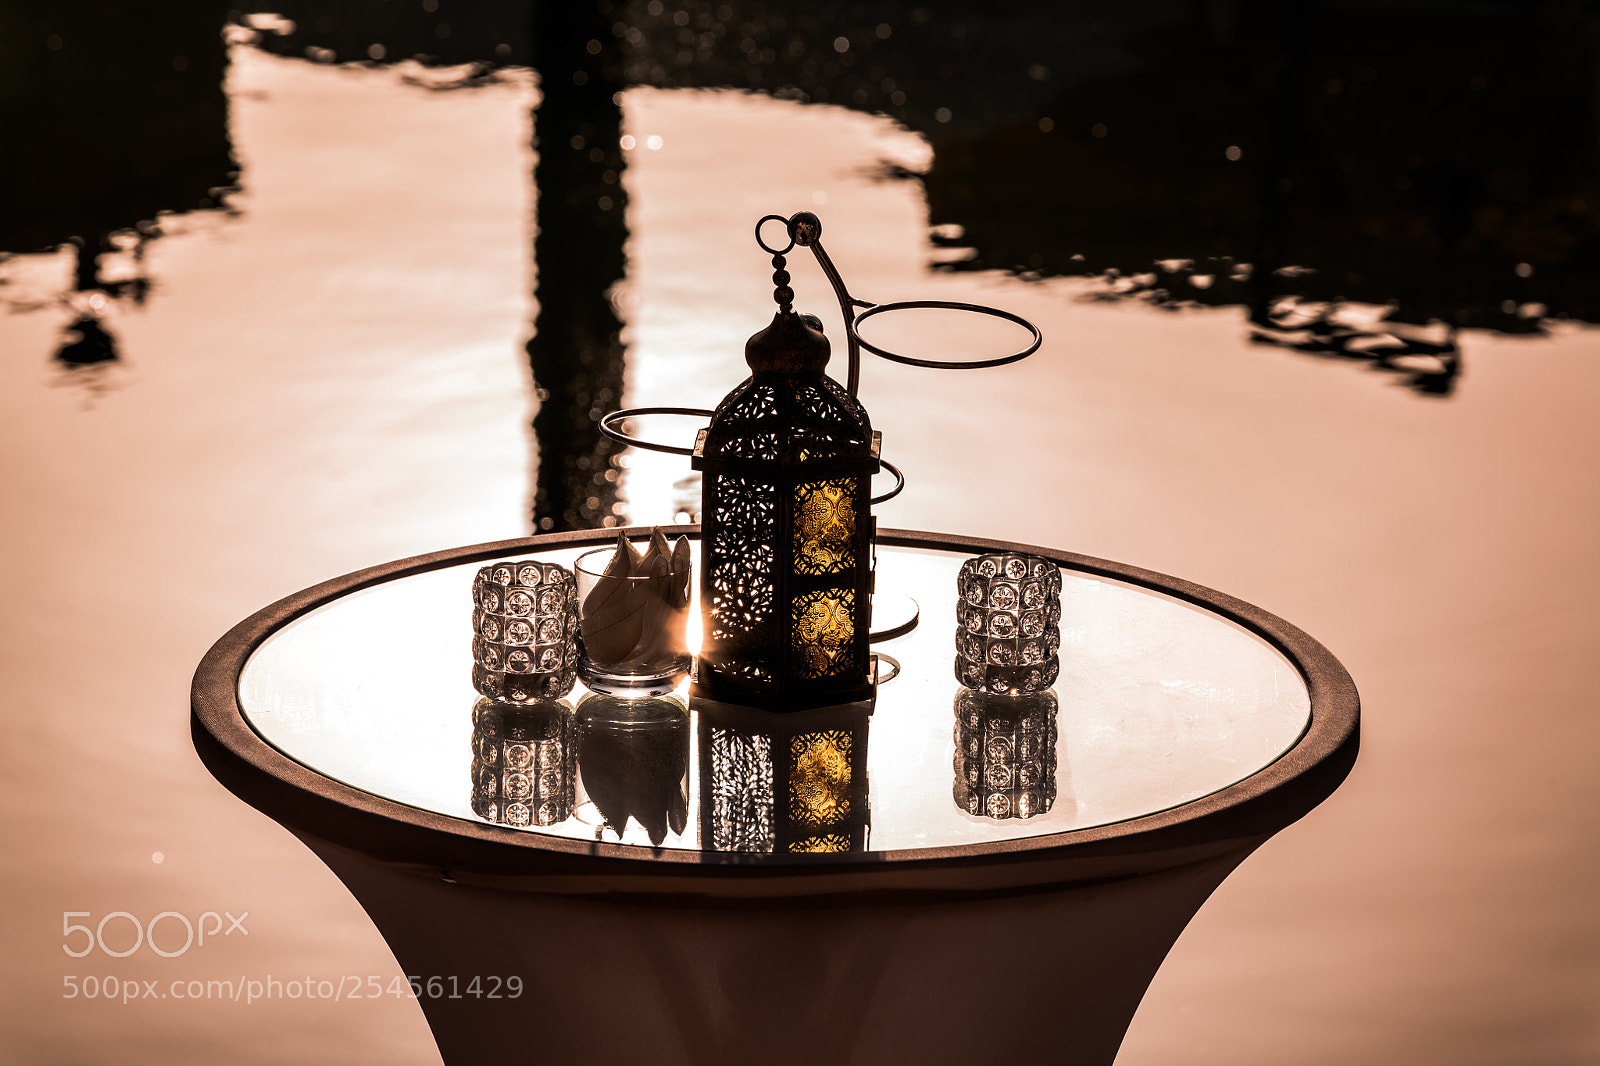 Nikon D850 sample photo. Sunlit water reflections mirrored photography